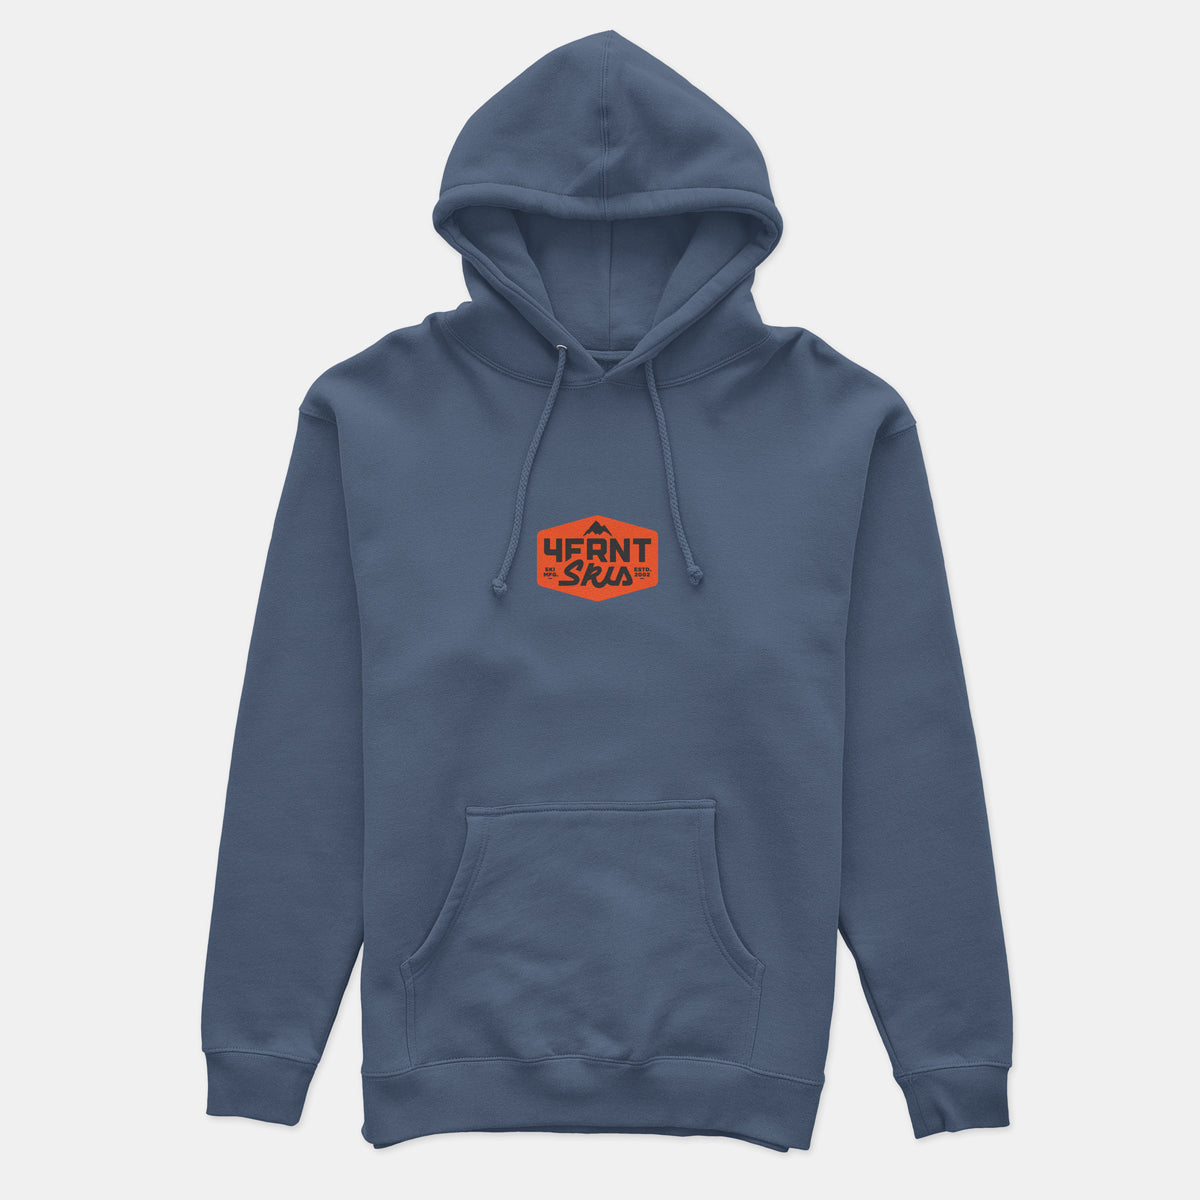 the 4frnt skis blue MFG with an orange badge hoodie front view